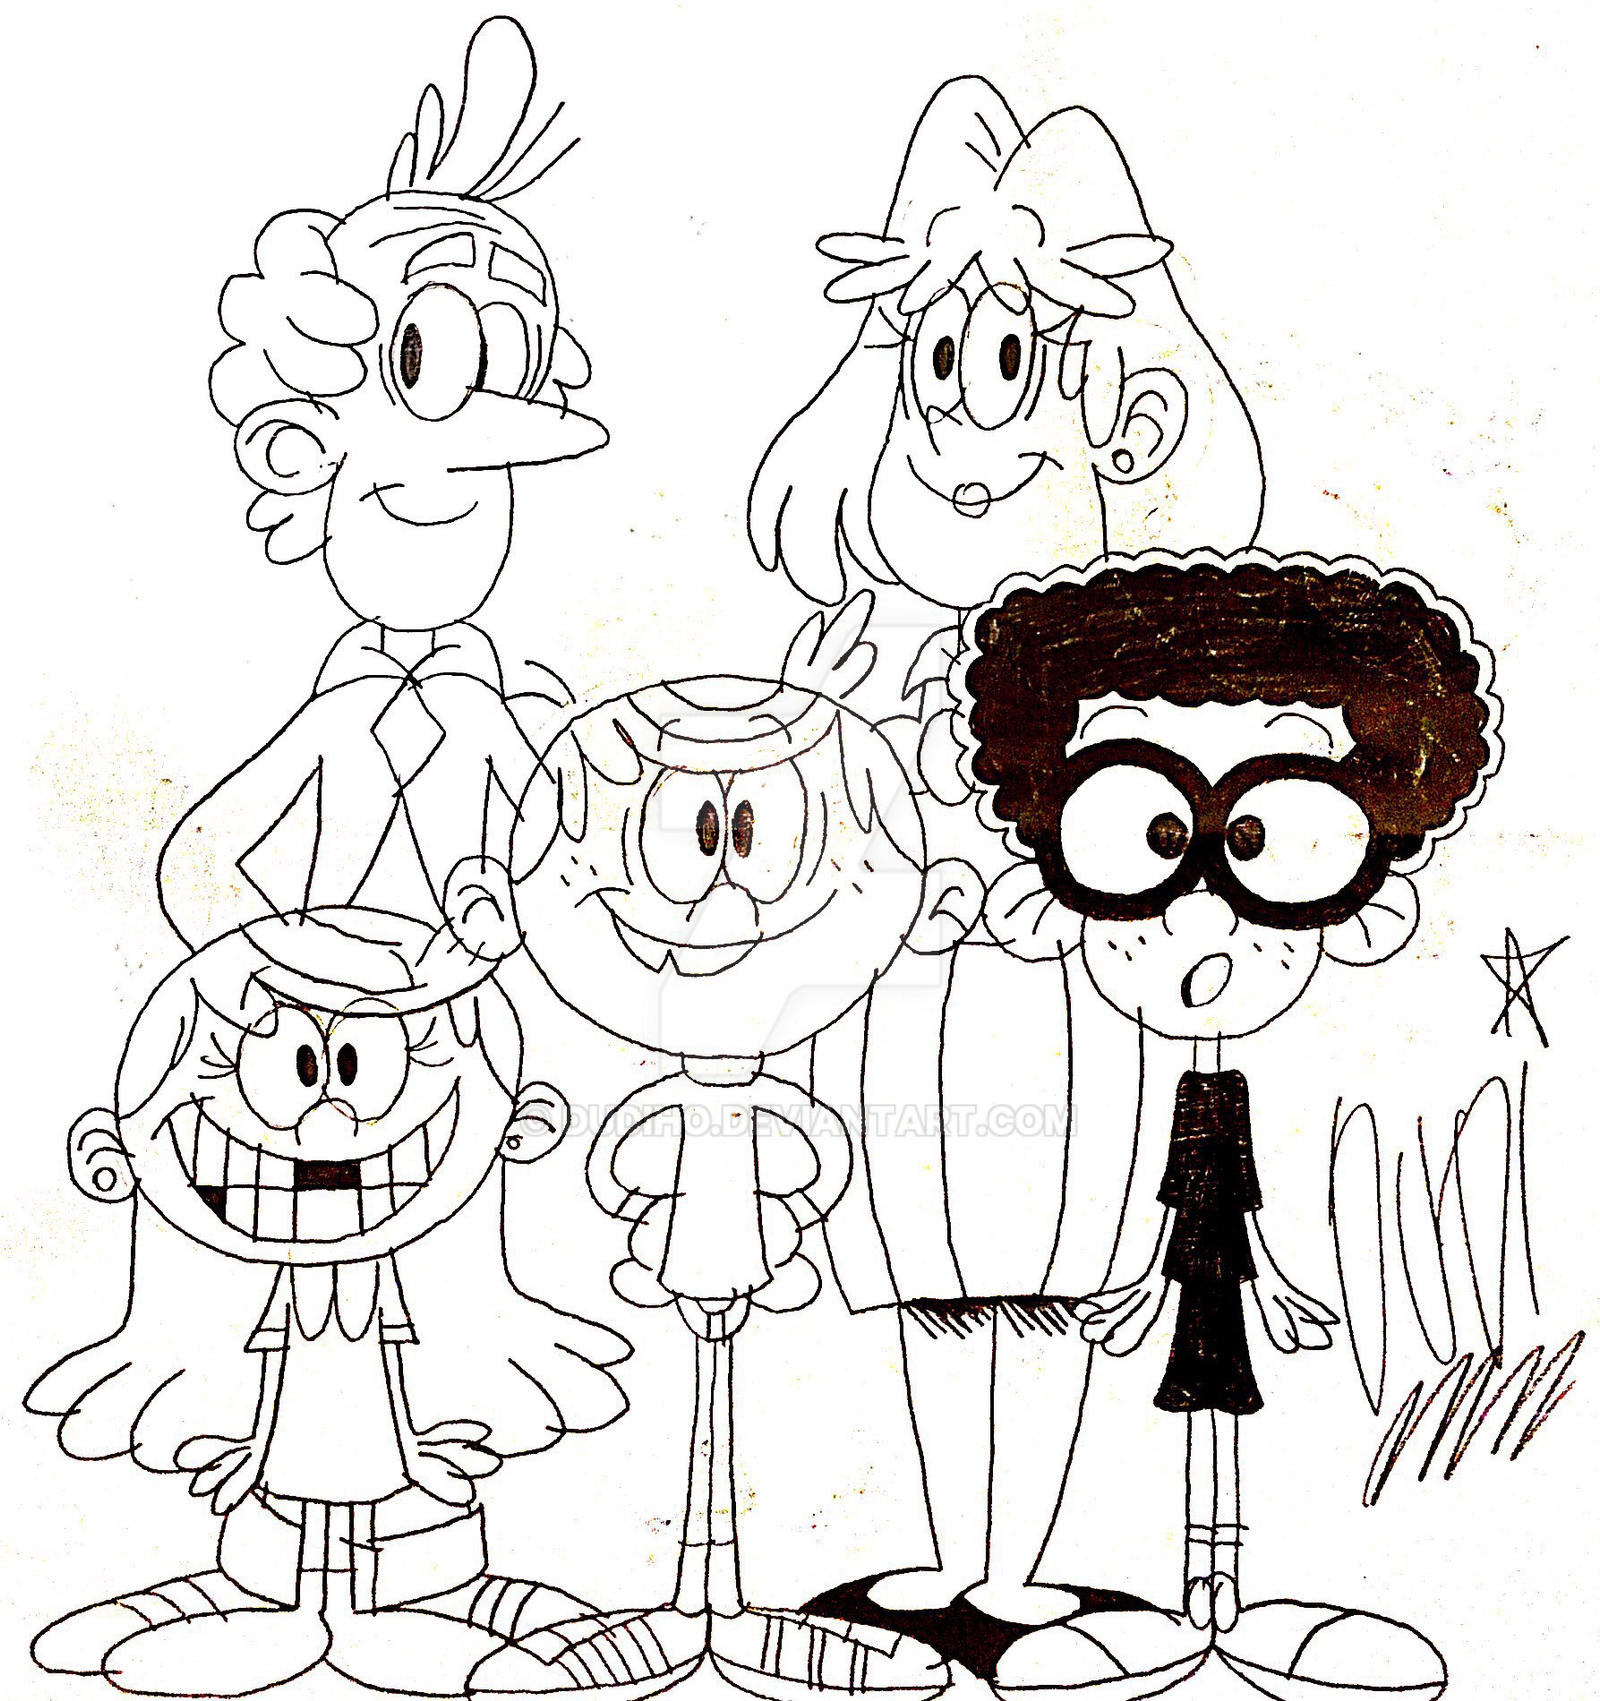 The Louds and Clyde dressed as Gumball family by dudiho on DeviantArt